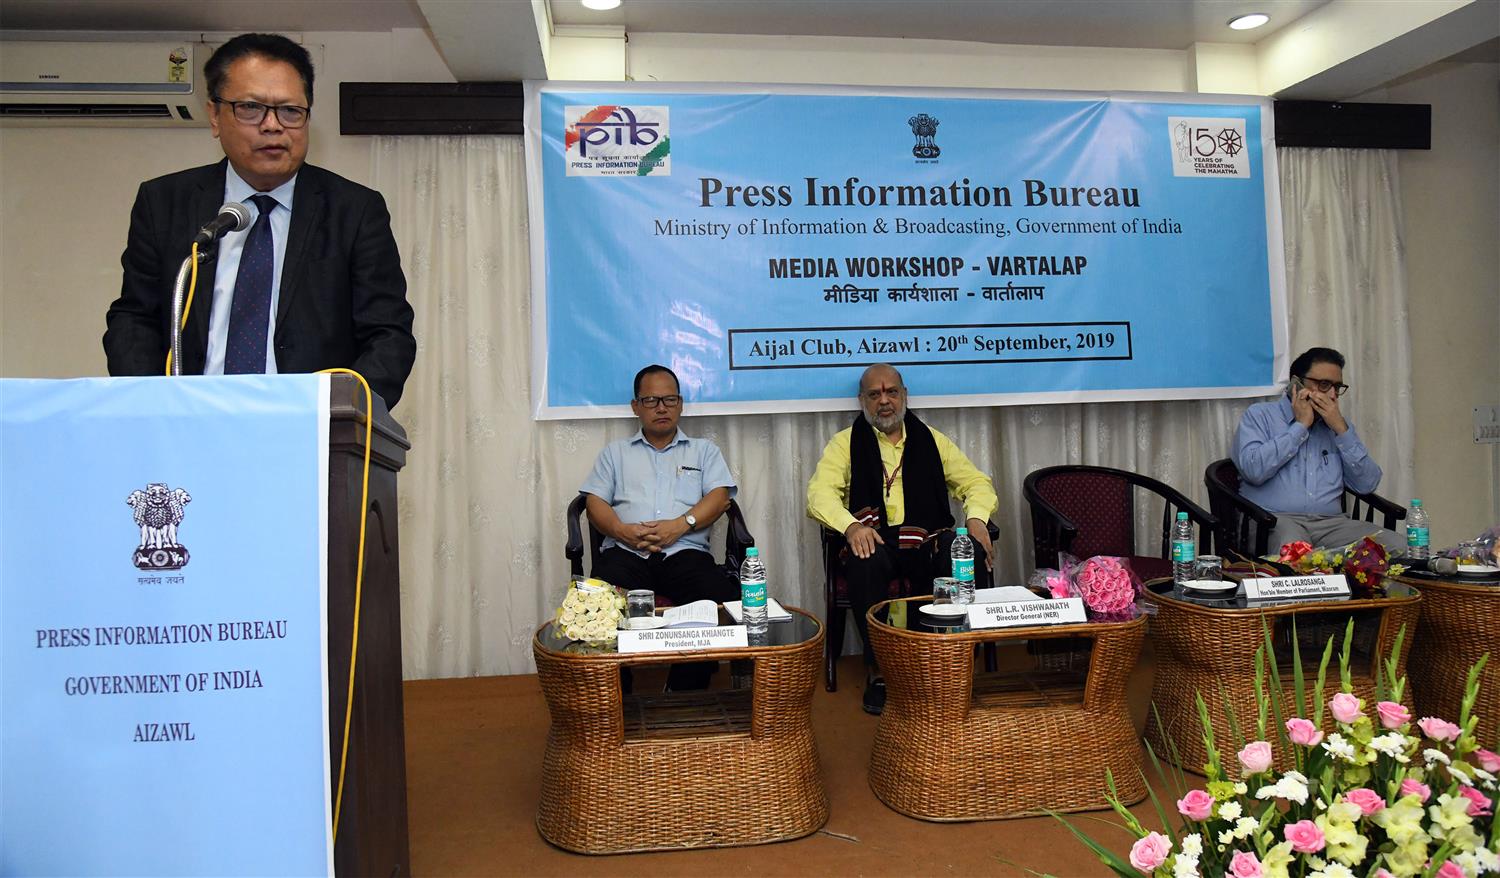 Shri C  Lalrosanga, Member of Parliament,Mizoram  delivering his inaugural speech at  Vartalap organized by Press Information Bureau, Aizawl on 20th September, 2019. Shri L R Vishwanath, Director General , Ministry of Information &  Broadcasting and Shri Zonunsanga Khiangte, President of Mozoram Journalist’s Association and Shri Ashish Kundra, CEO, Election office of Mizoram are also seen in the picture.